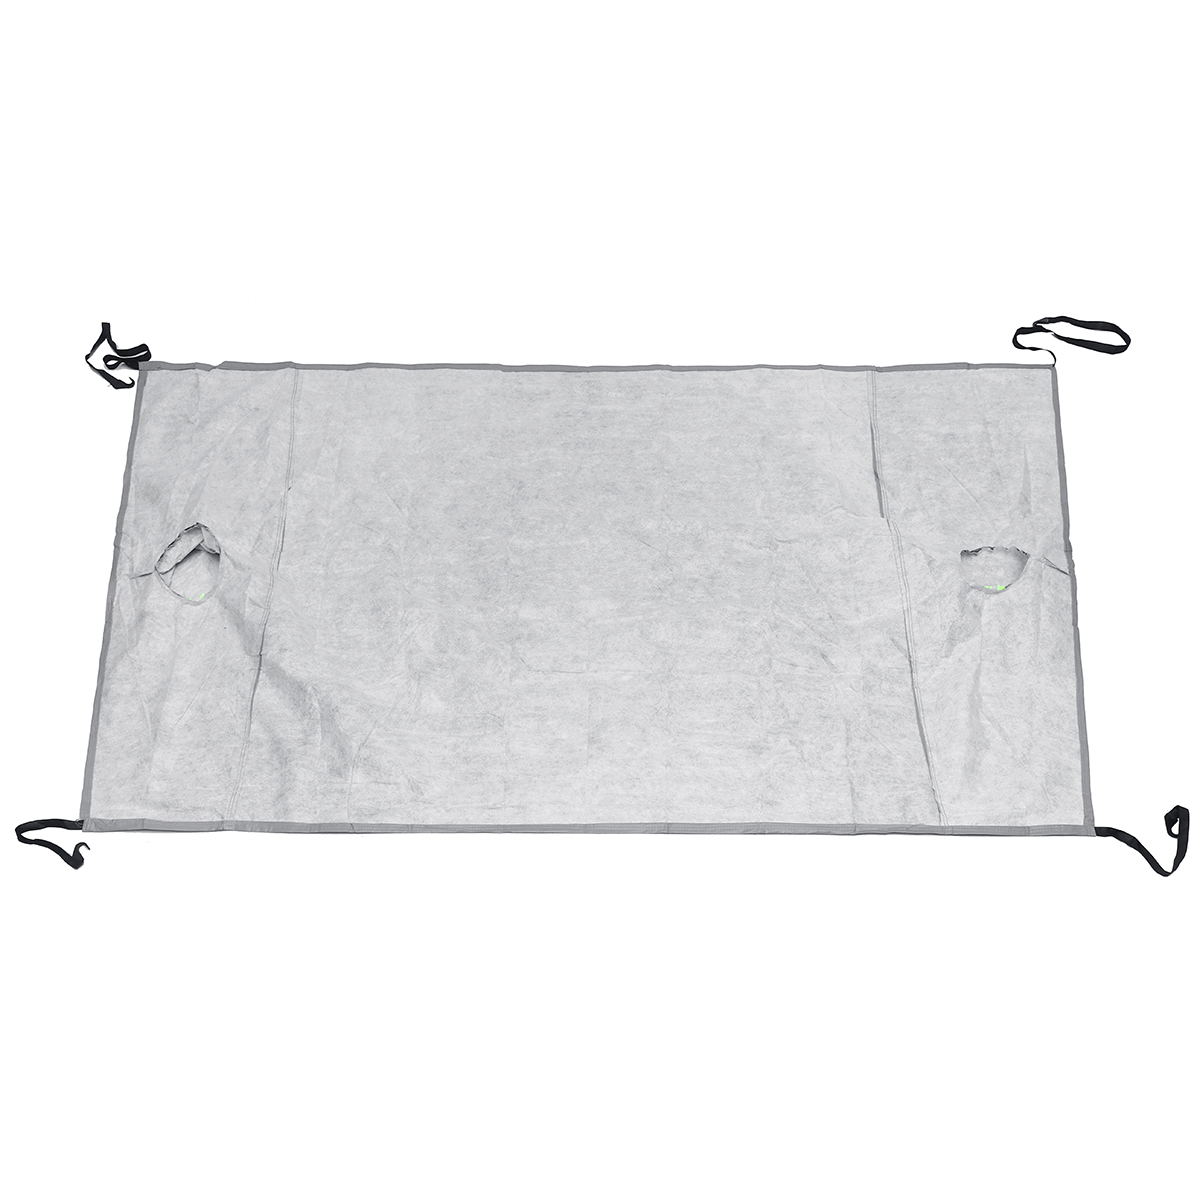 238x128cm-Car-Windshield-Cover-With-Reflective-Strip-Sun-Snow-Ice-Rain-Dust-Frost-Guard-Protector-1416901